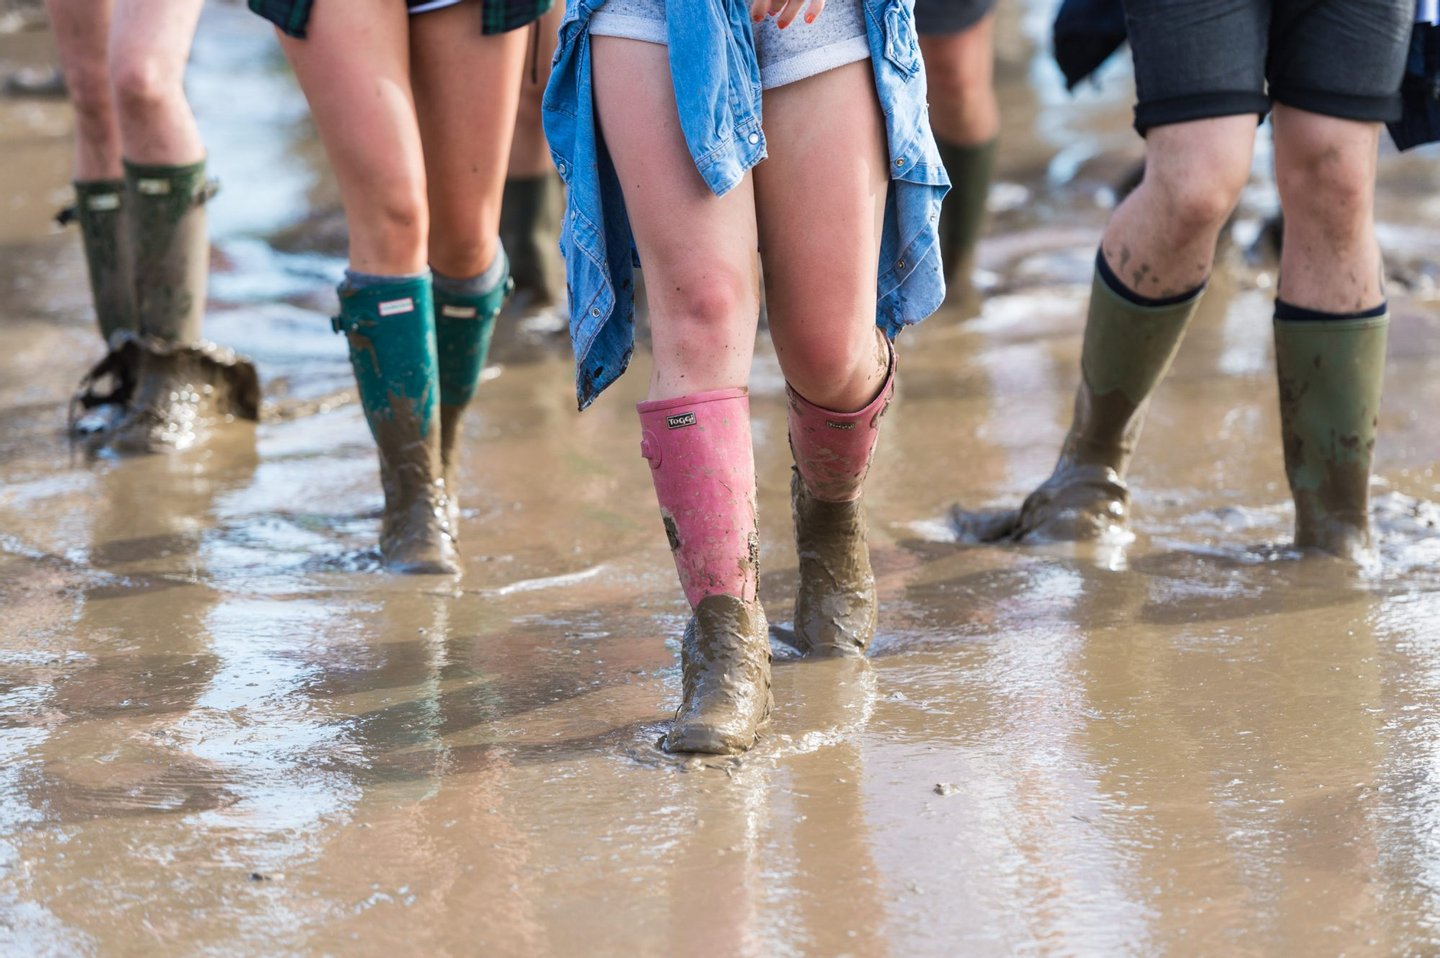 GLASTONBURY, ENGLAND - JUNE 22: Festival goers wade through the deep mud at the Glastonbury Festival at Worthy Farm, Pilton on June 22, 2016 in Glastonbury, England. Now its 46th year the festival is one largest music festivals in the world and this year features headline acts Muse, Adele and Coldplay. The Festival, which Michael Eavis started in 1970 when several hundred hippies paid just Â£1, now attracts more than 175,000 people. (Photo by Ian Gavan/Getty Images)